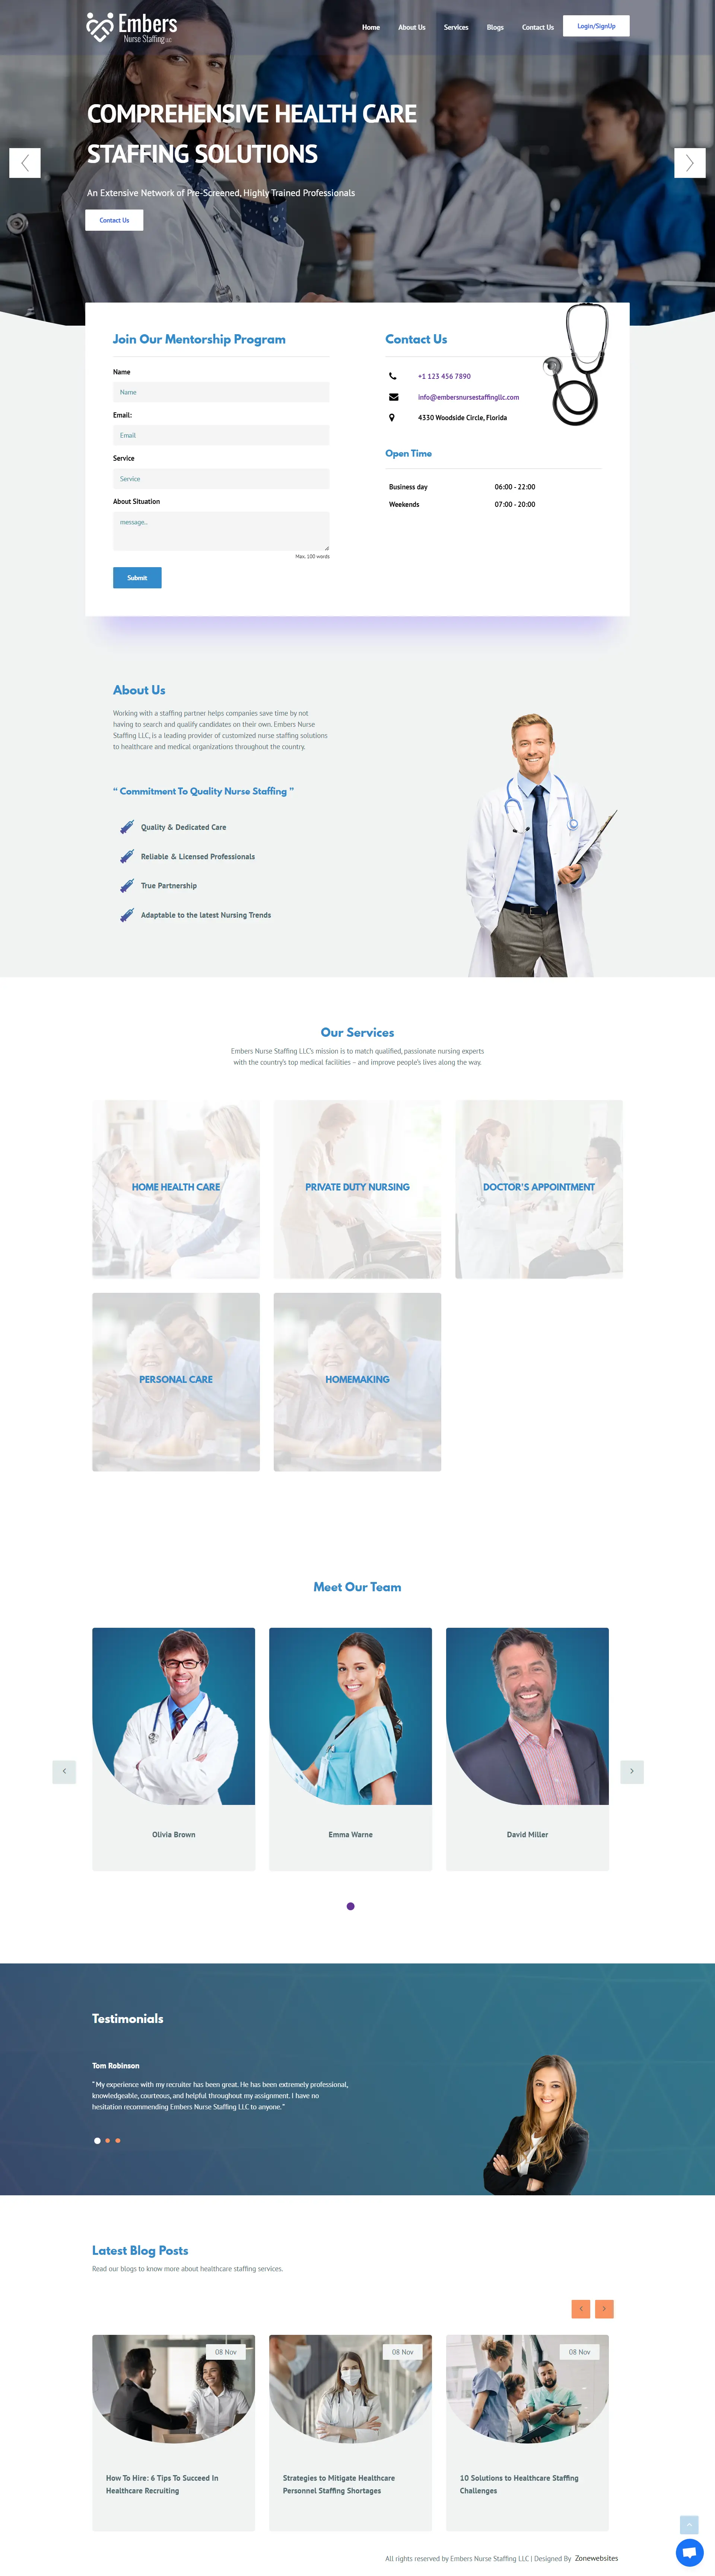 Healthcare Staffing Services Website Layout